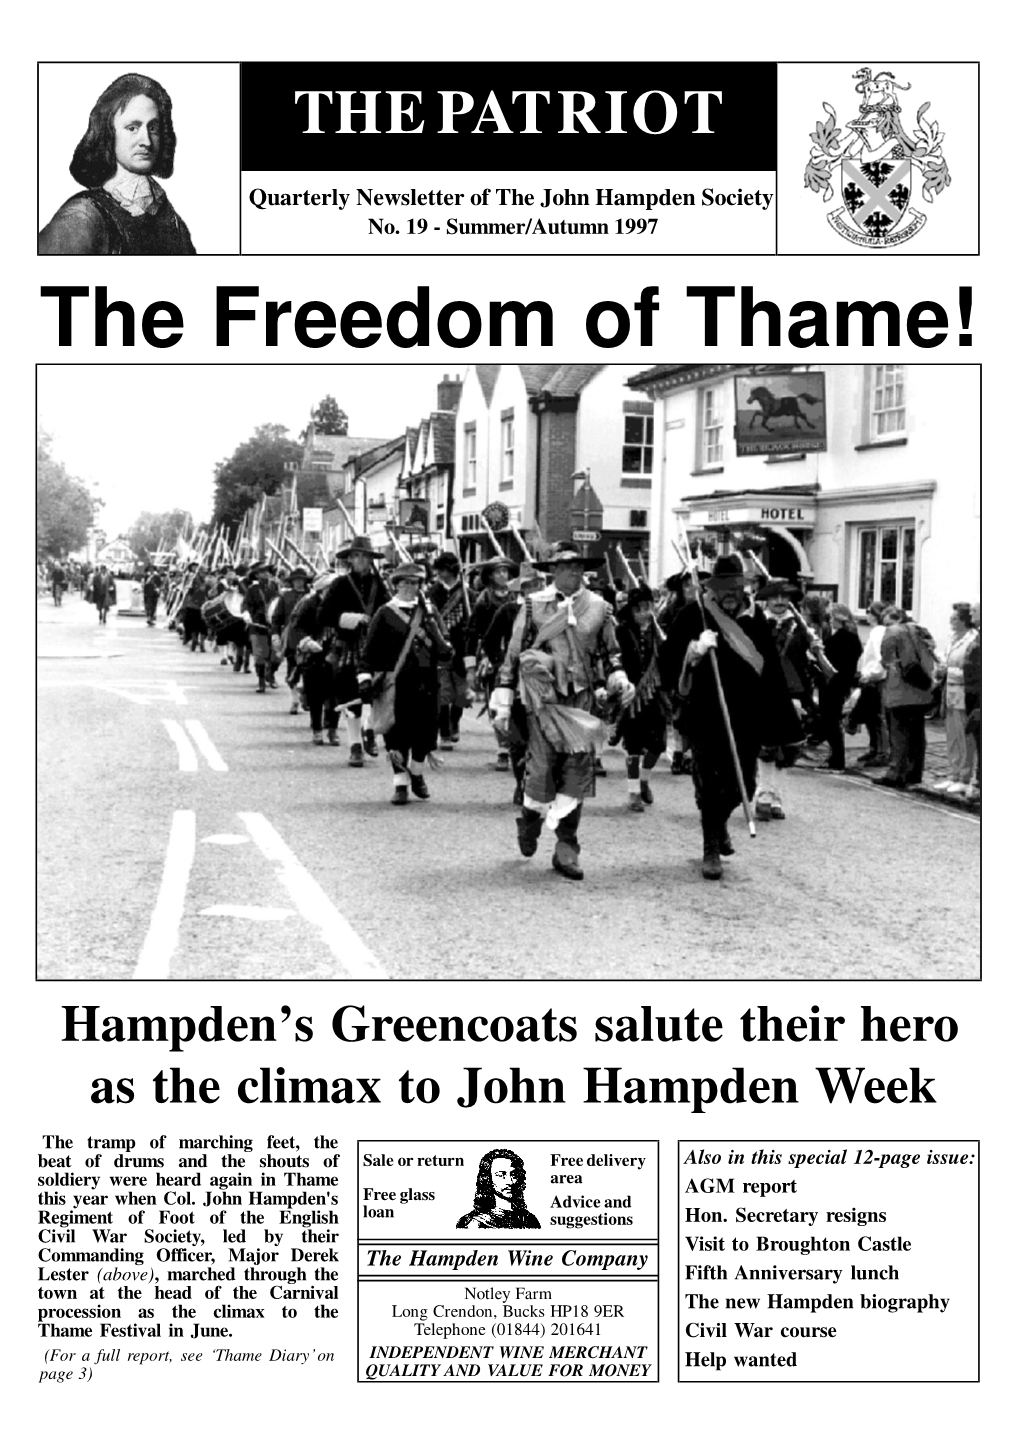 The Freedom of Thame!